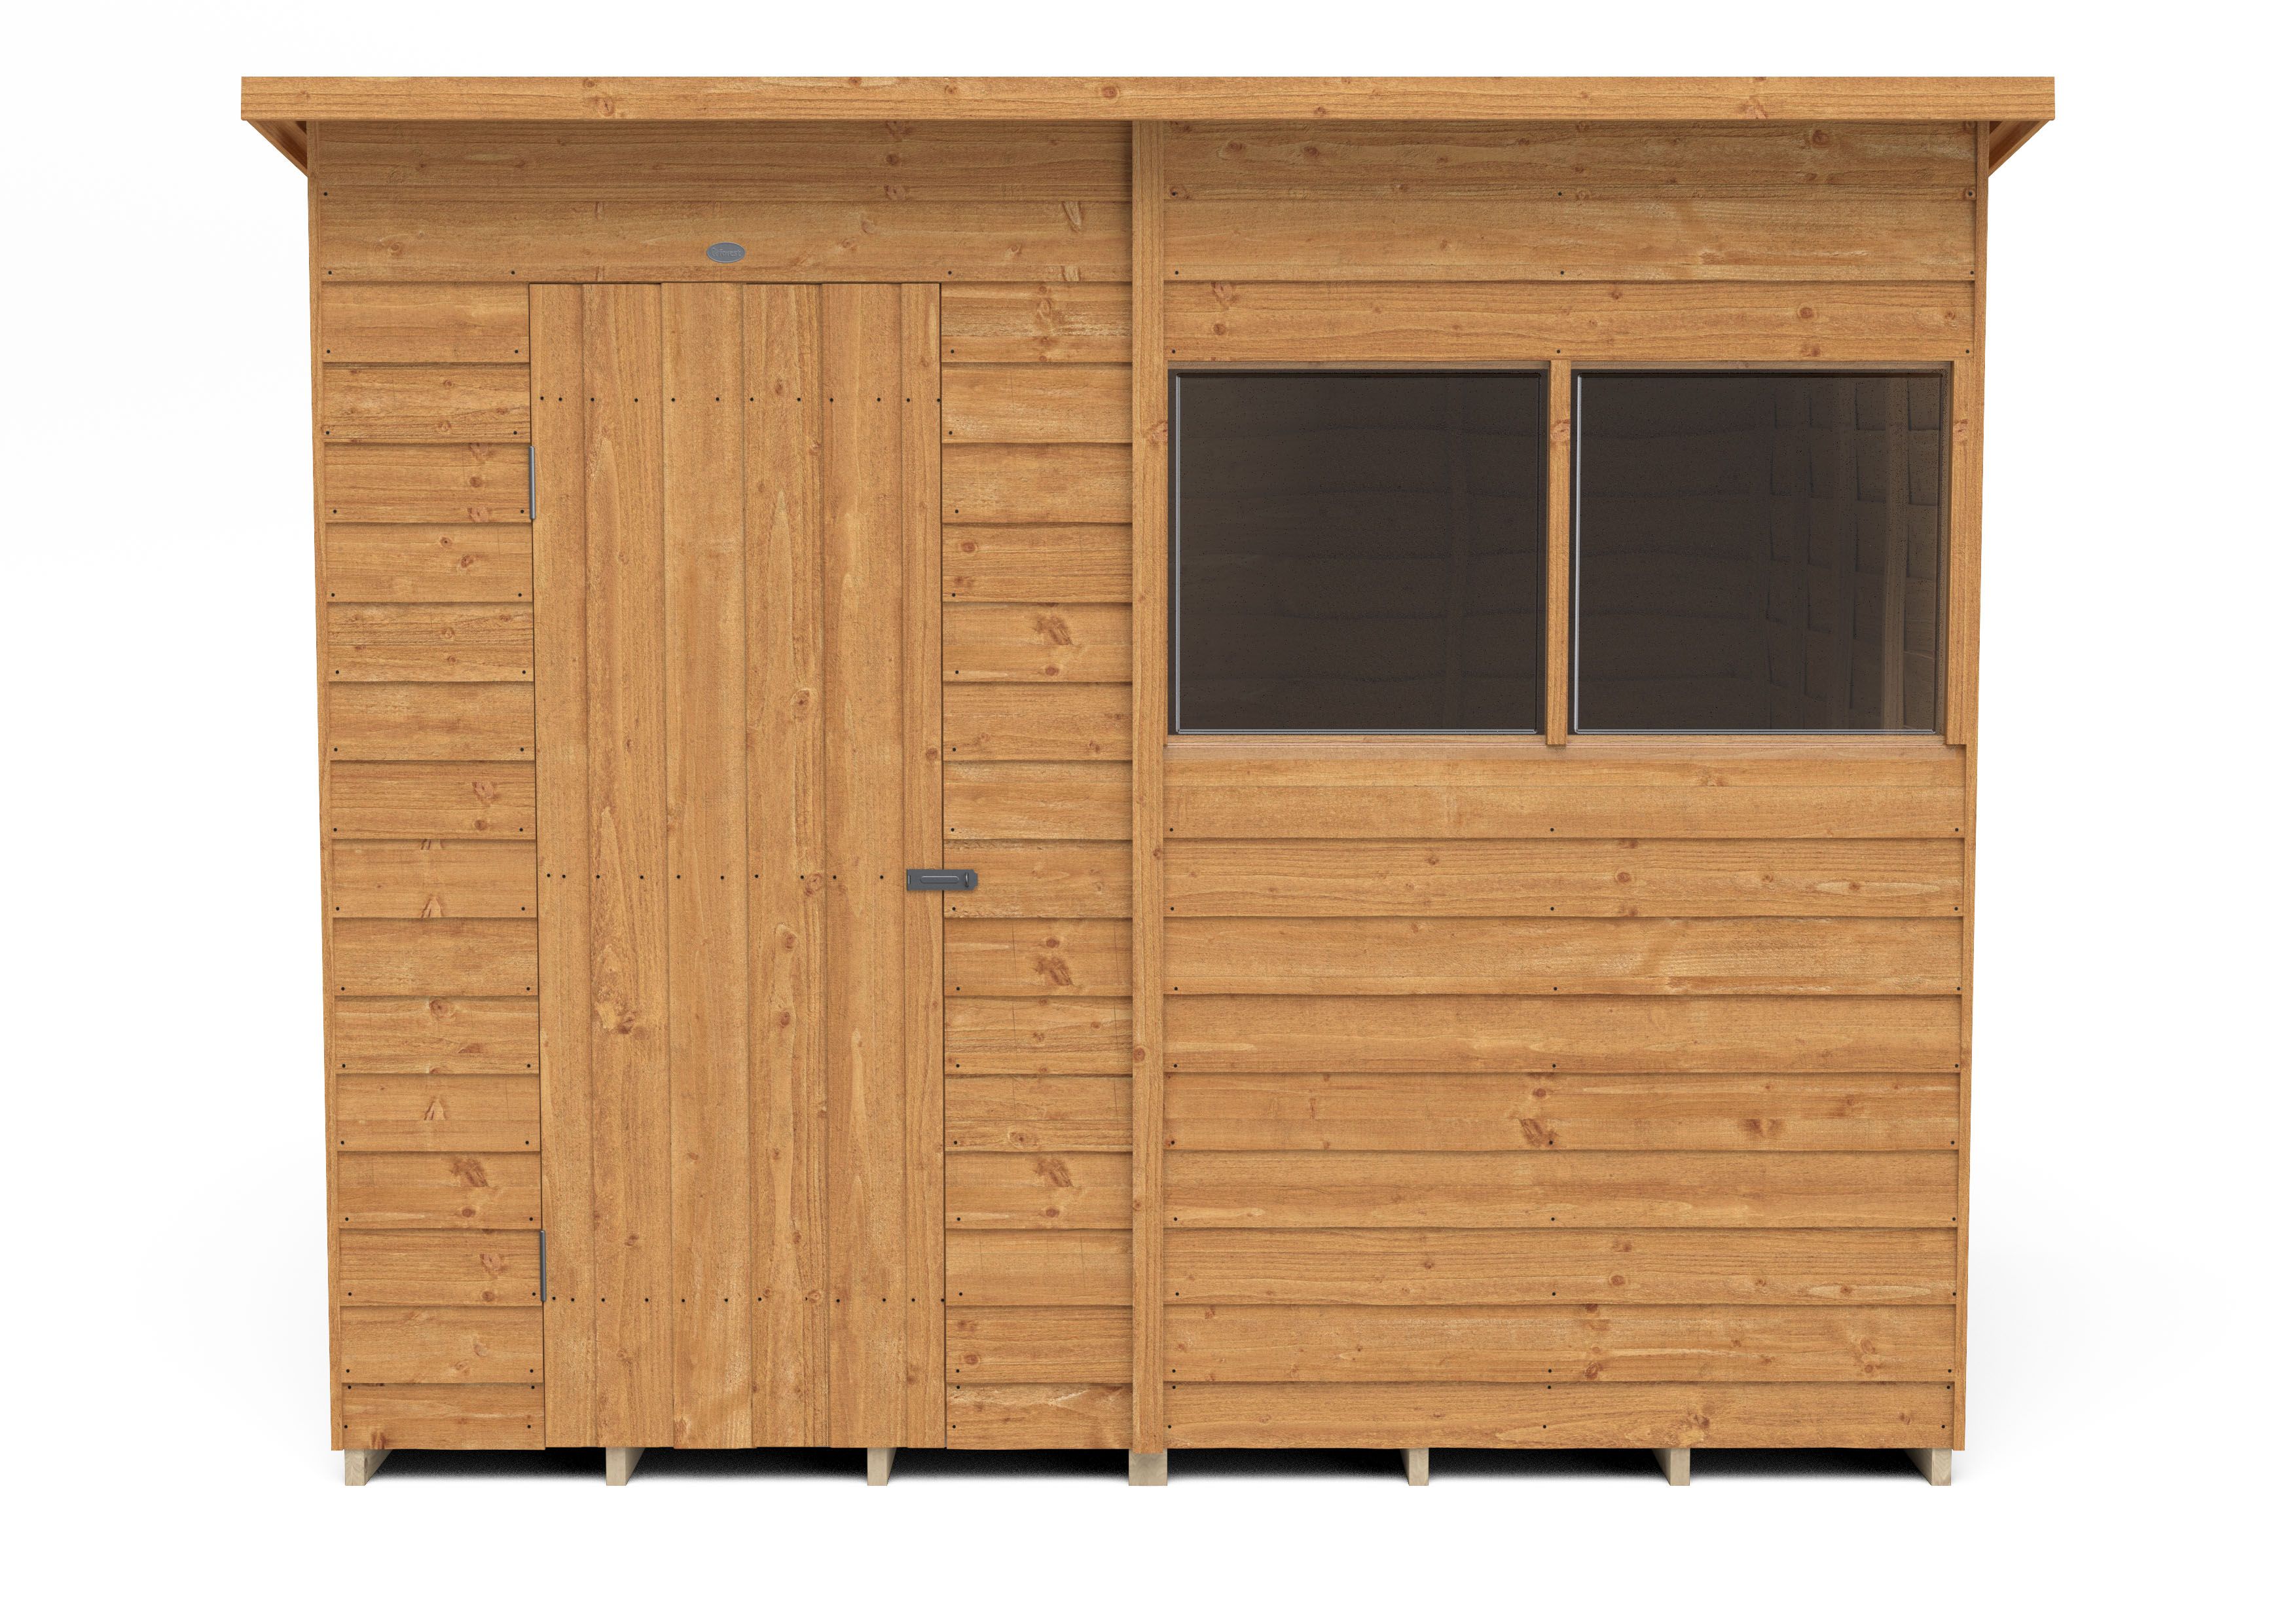 Forest Garden Overlap 8x6 ft Pent Wooden Dip treated Shed with floor & 2 windows